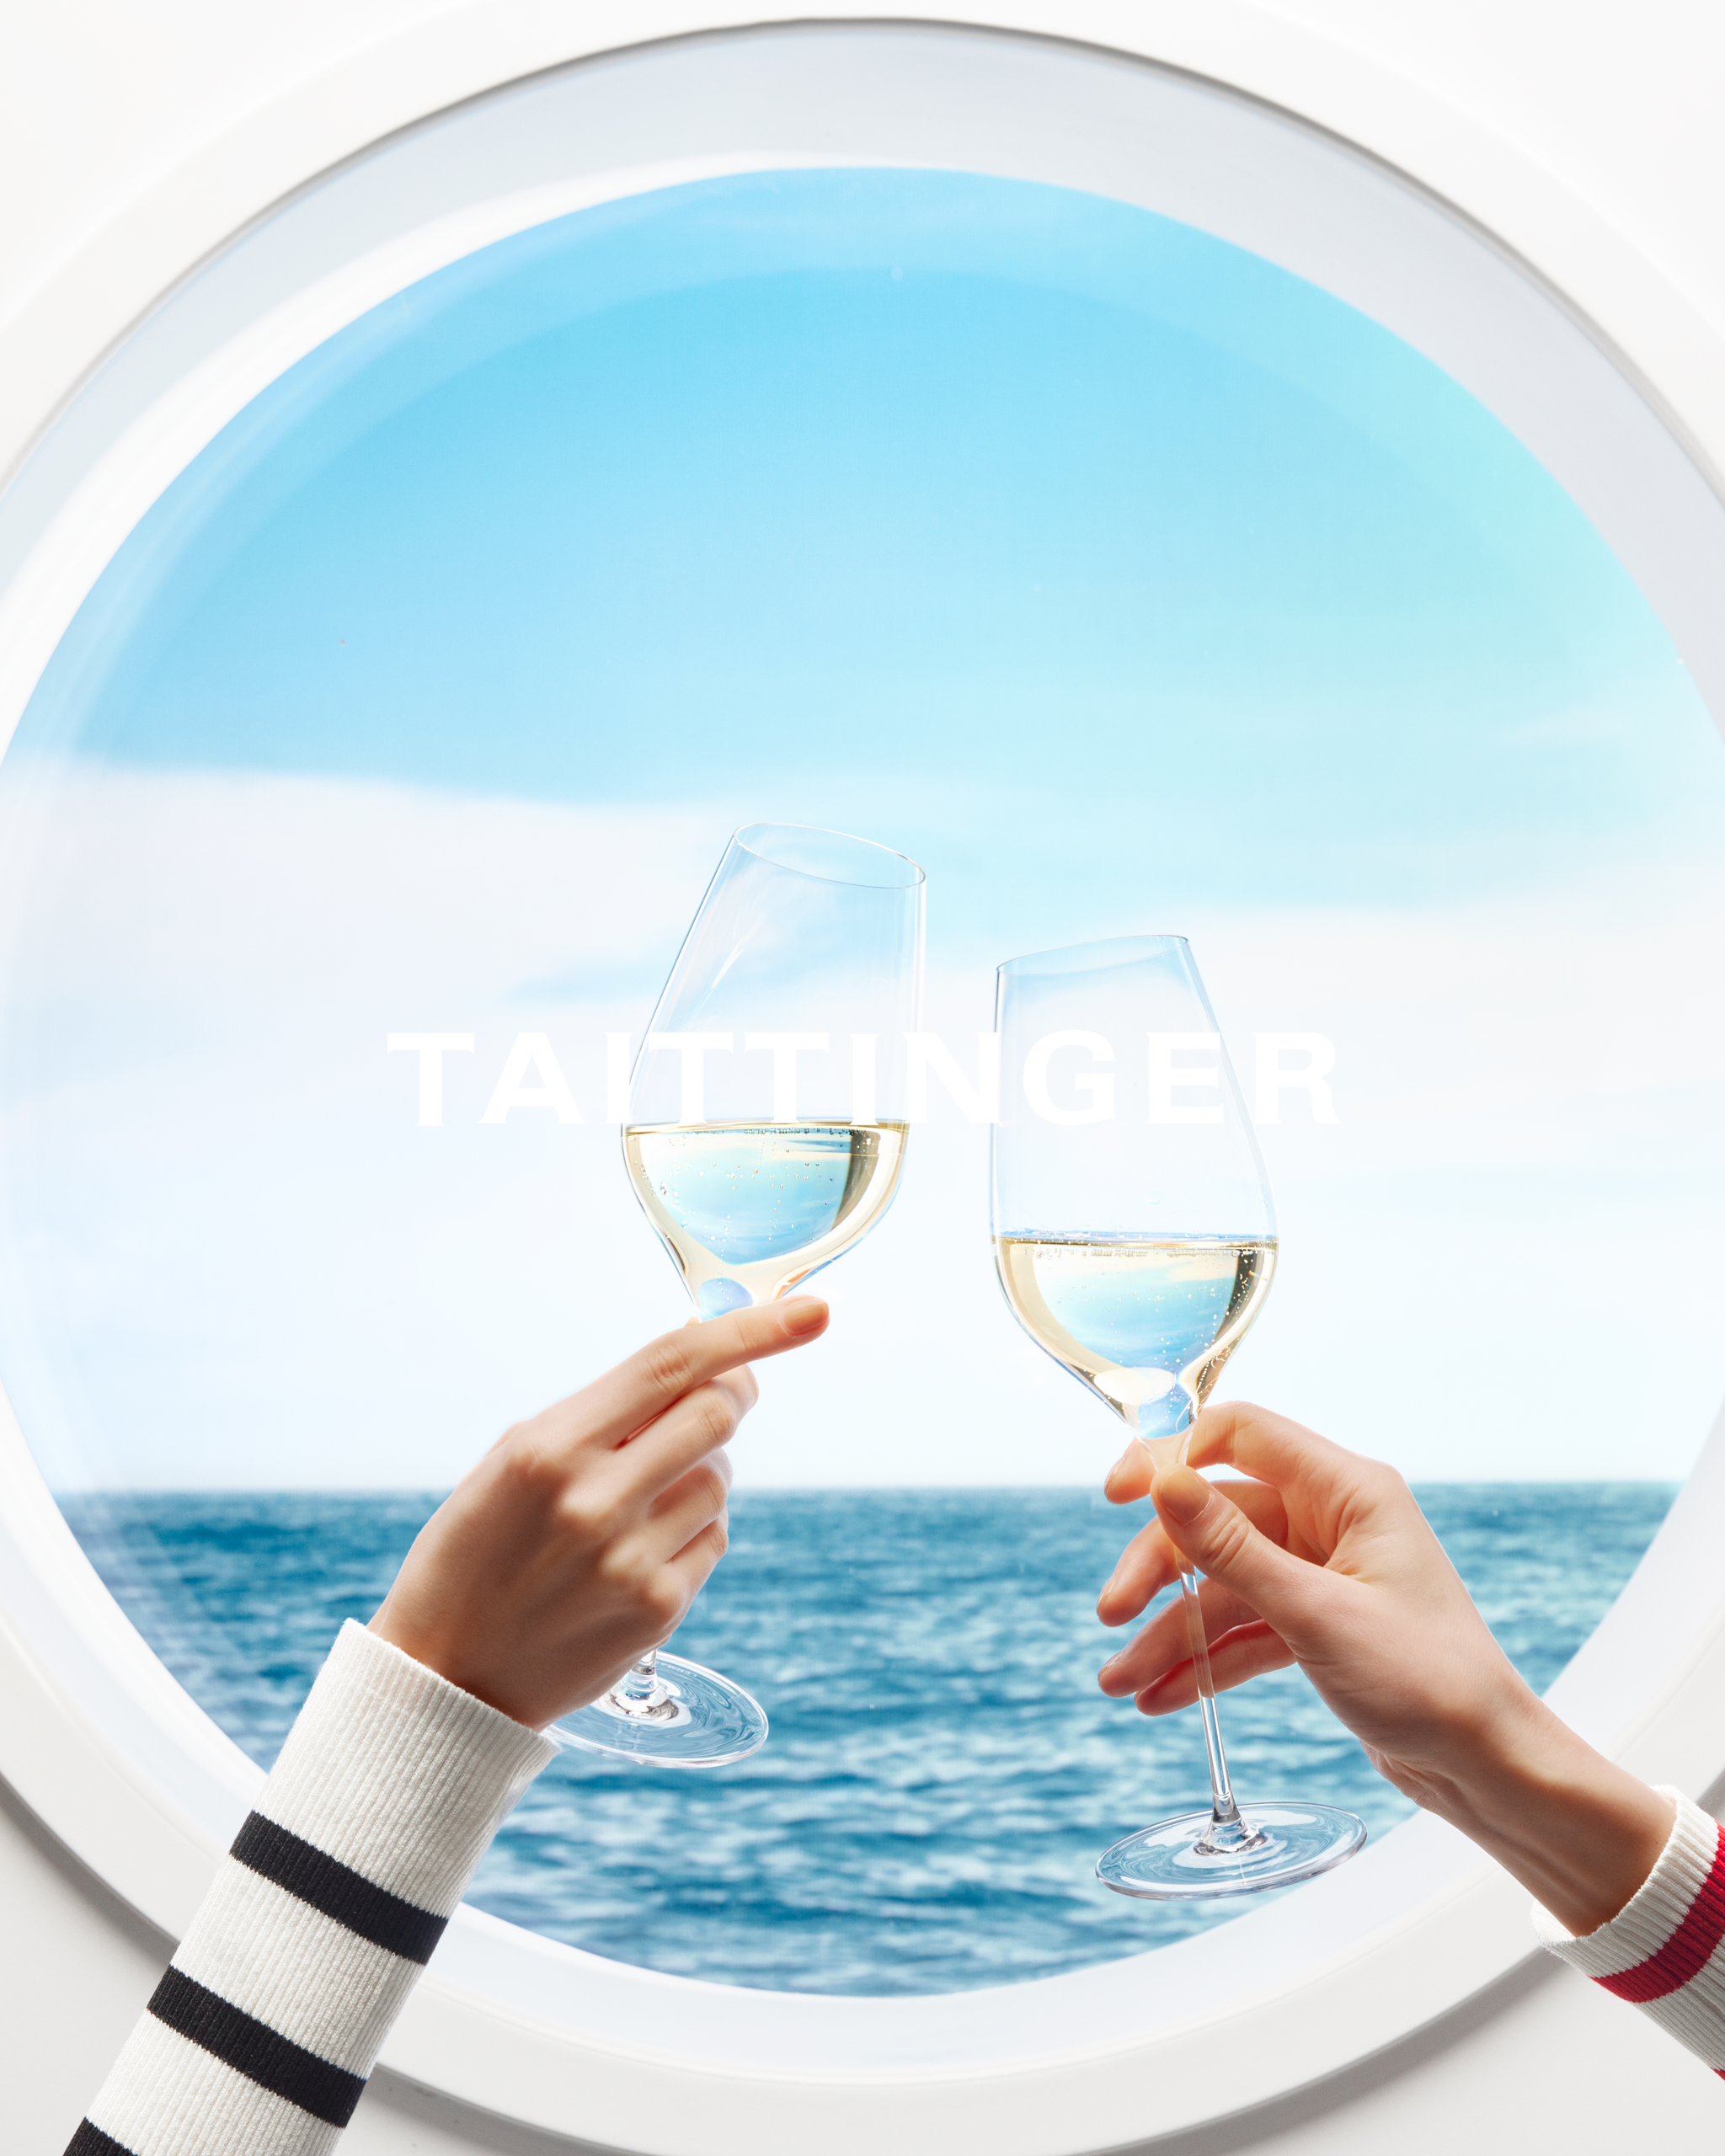 06 TAITTINGER - MESSAGE IN A BOTTLE glasses.png